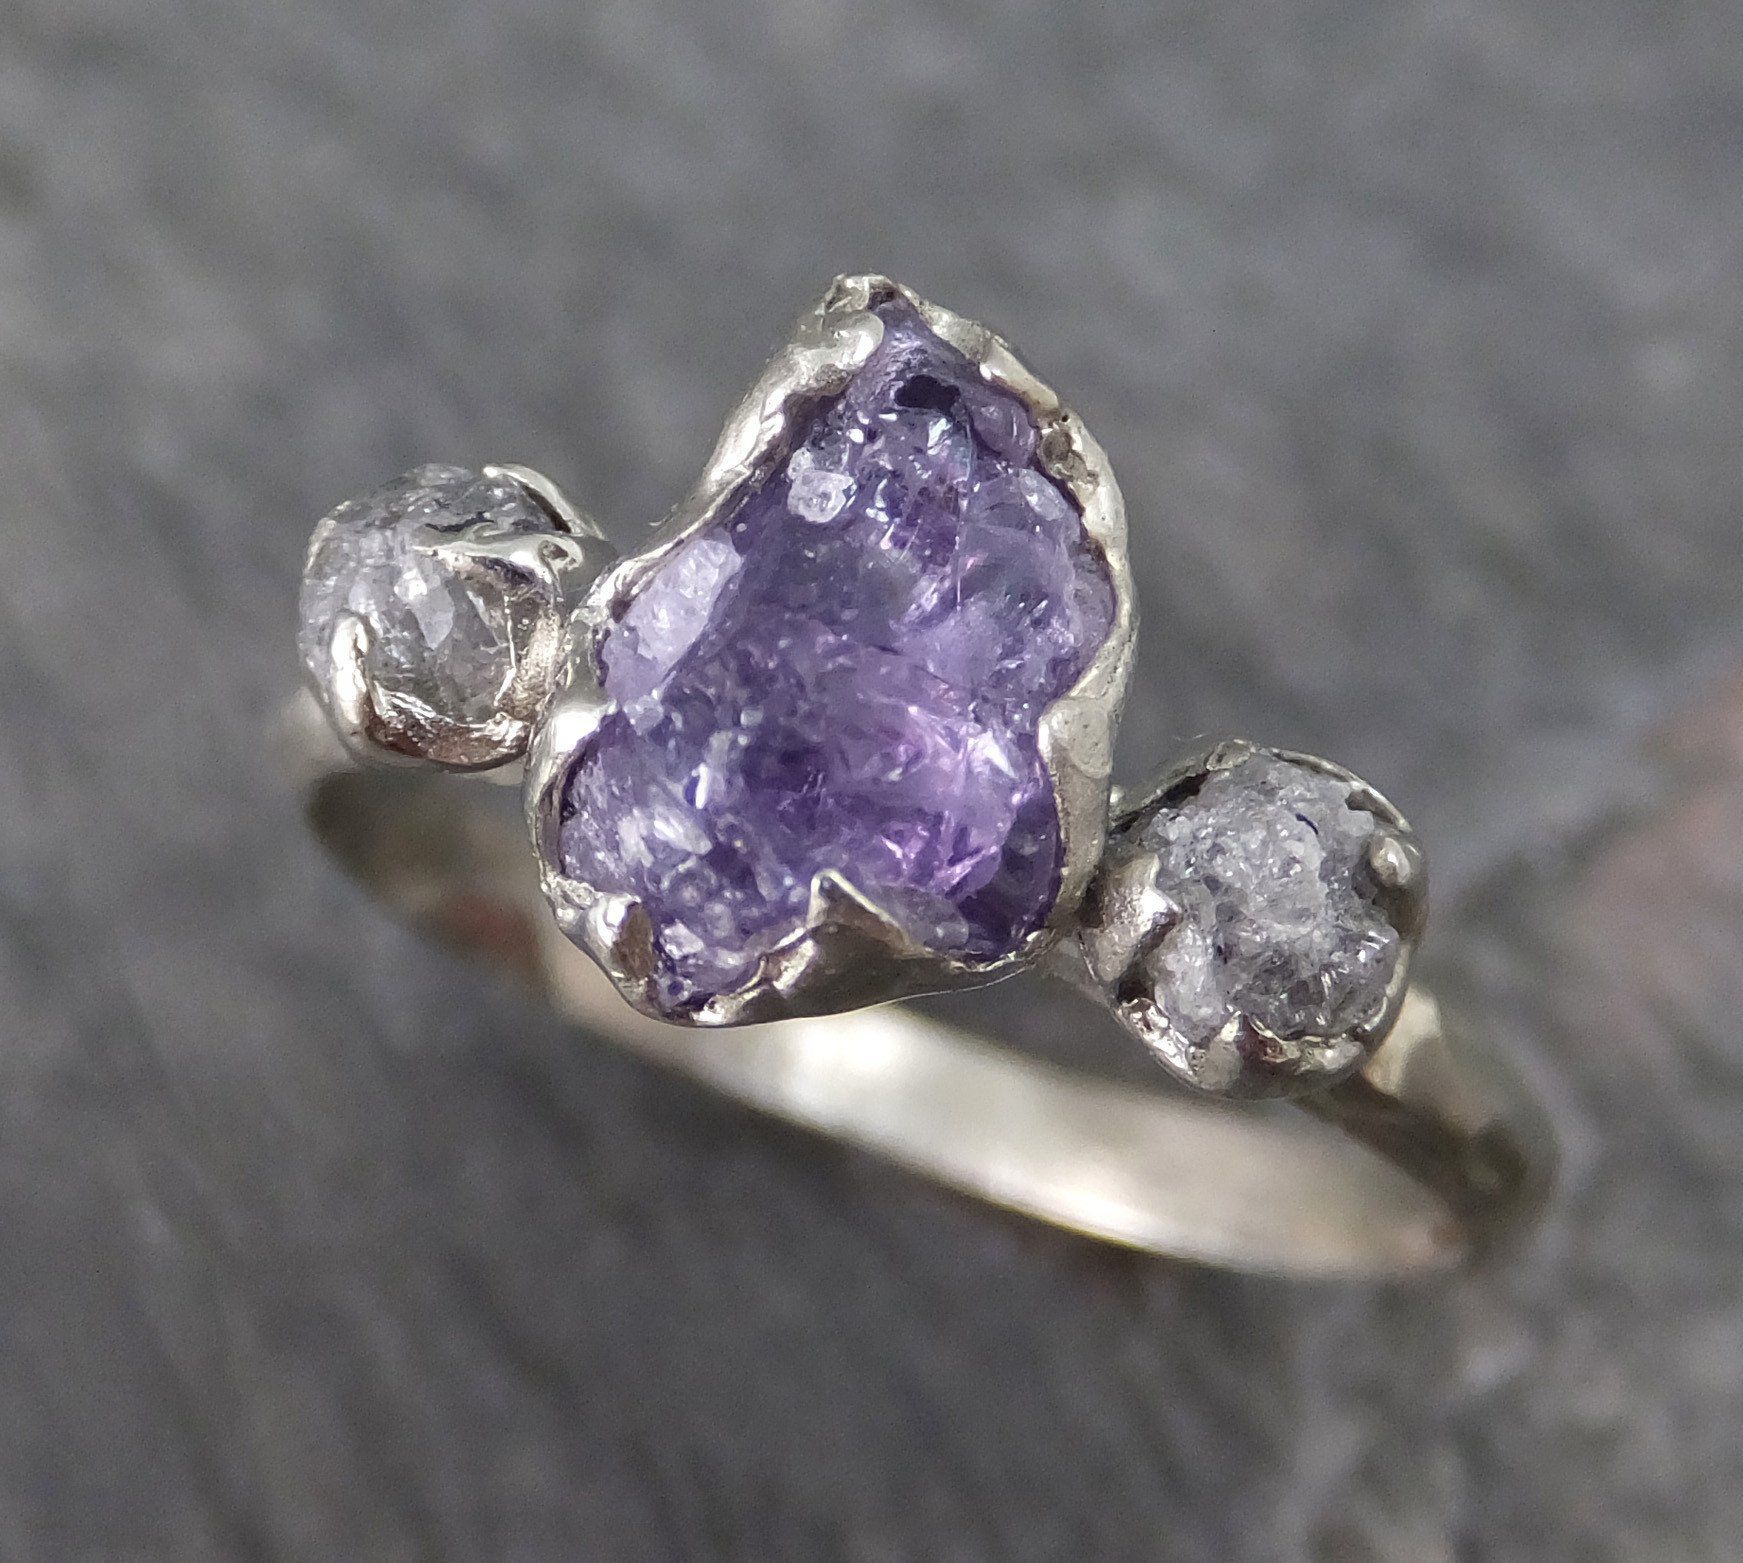 Raw Sapphire Diamond White Gold Engagement Ring Wedding Ring One Of a Kind Violet Purple Gemstone Lavender Three stone Ring - by Angeline